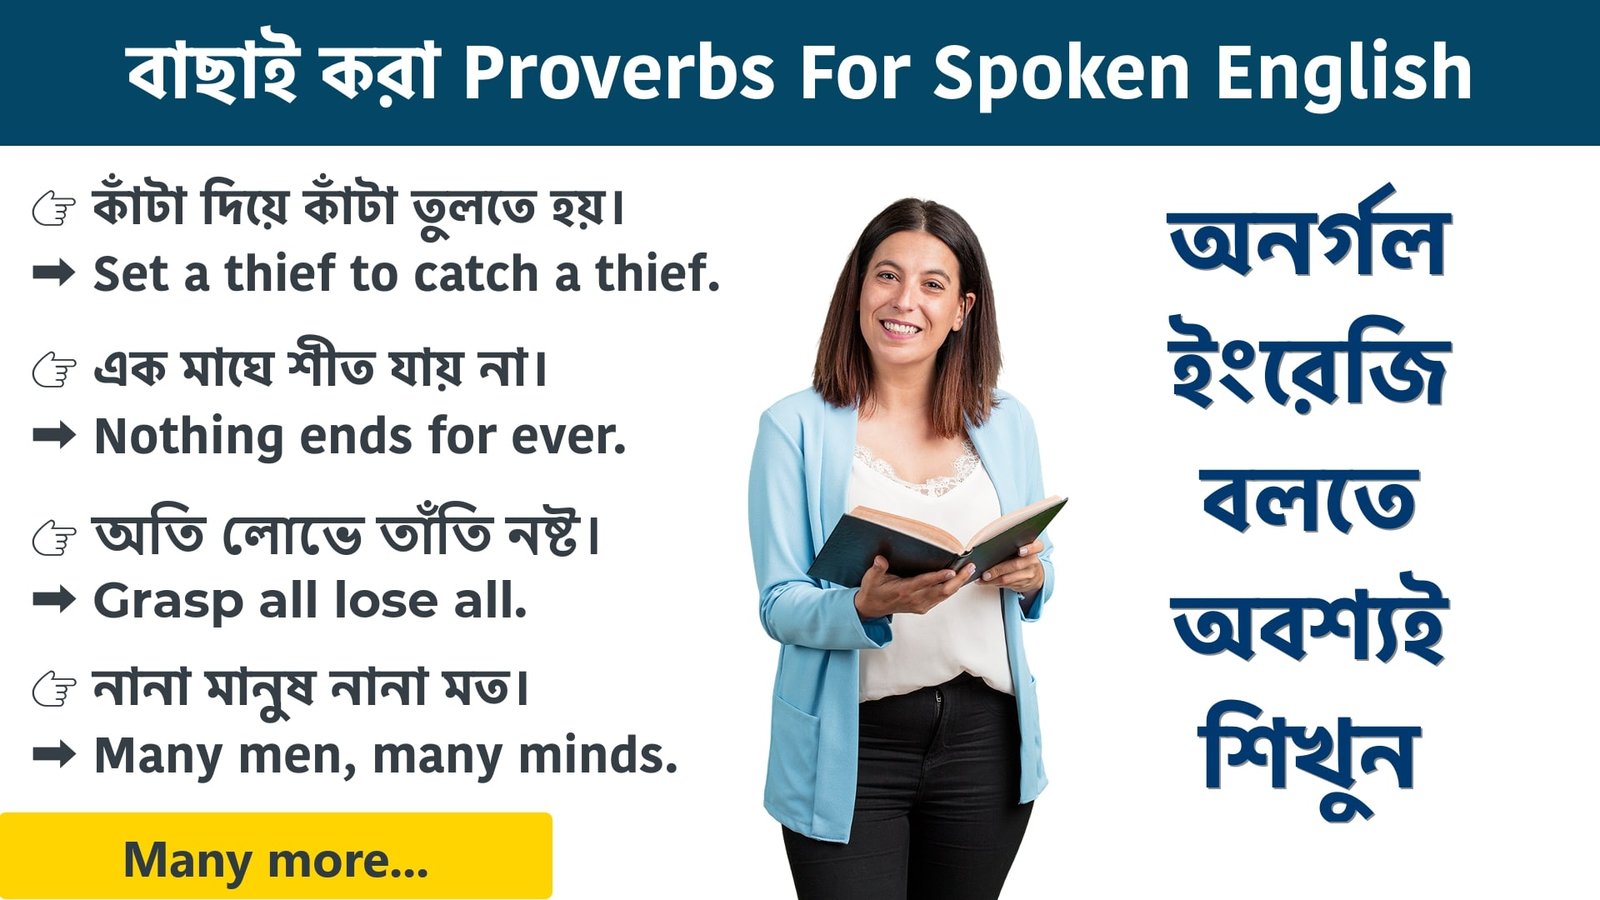 Proverbs with Bengali meaning Proverbs